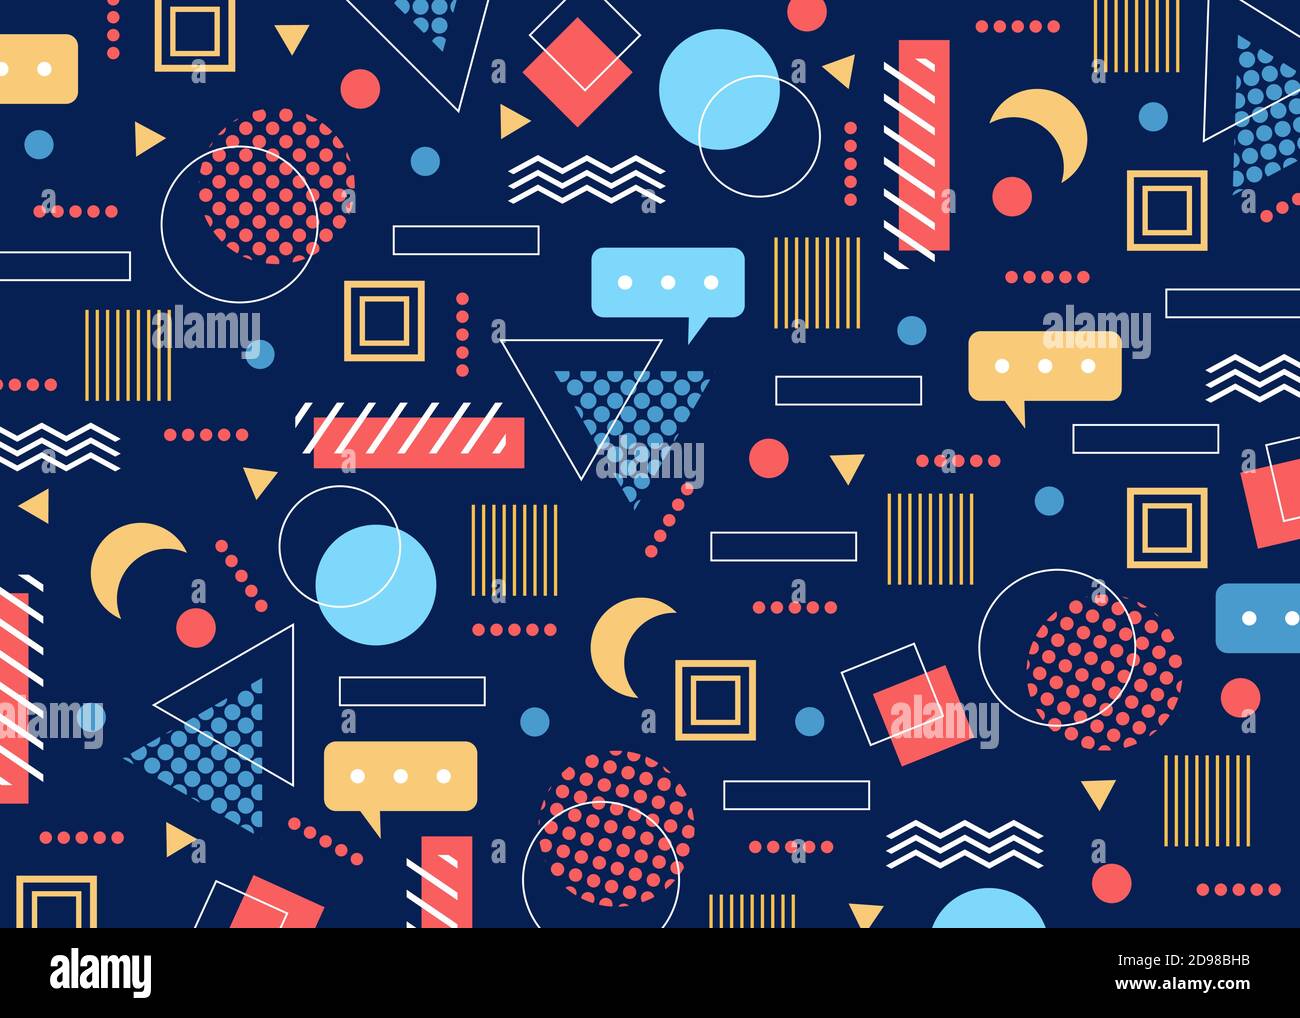 https://c8.alamy.com/comp/2D98BHB/geometric-pattern-vector-illustration-abstract-modern-creative-geometry-design-with-elements-in-various-colors-geometric-trendy-shapes-and-lines-circles-triangles-squares-moon-on-blue-background-2D98BHB.jpg